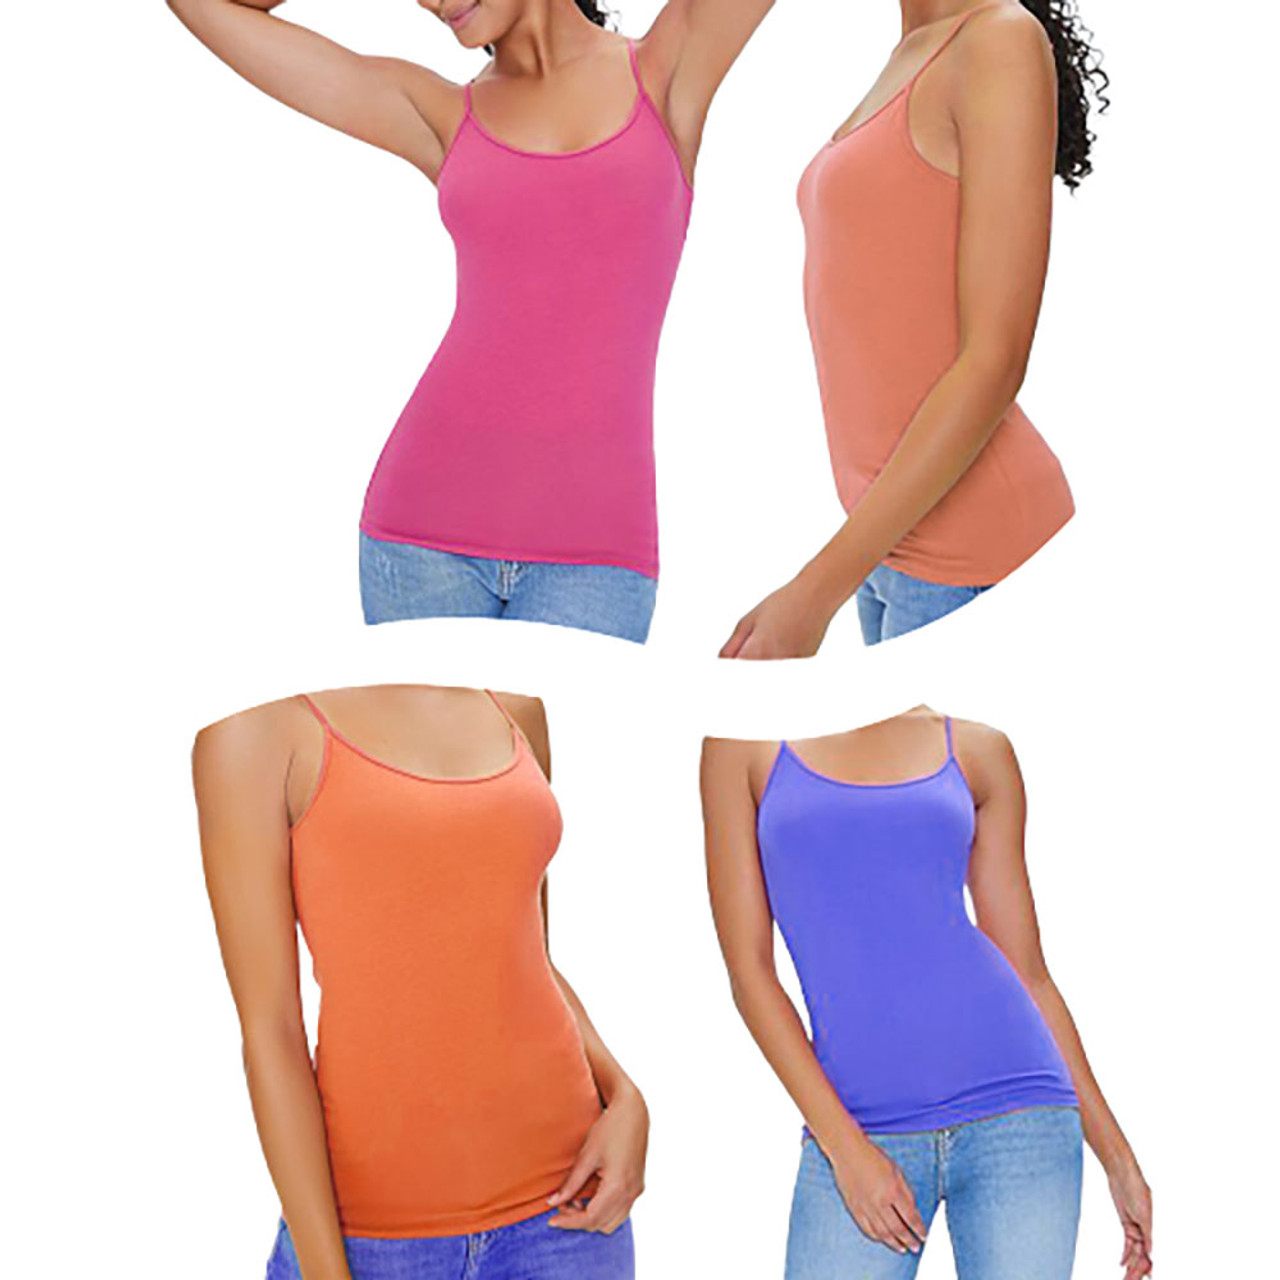 Women's Stretchy Camisole Spaghetti Strap Tank Top (4-Pack) - Pick Your Plum